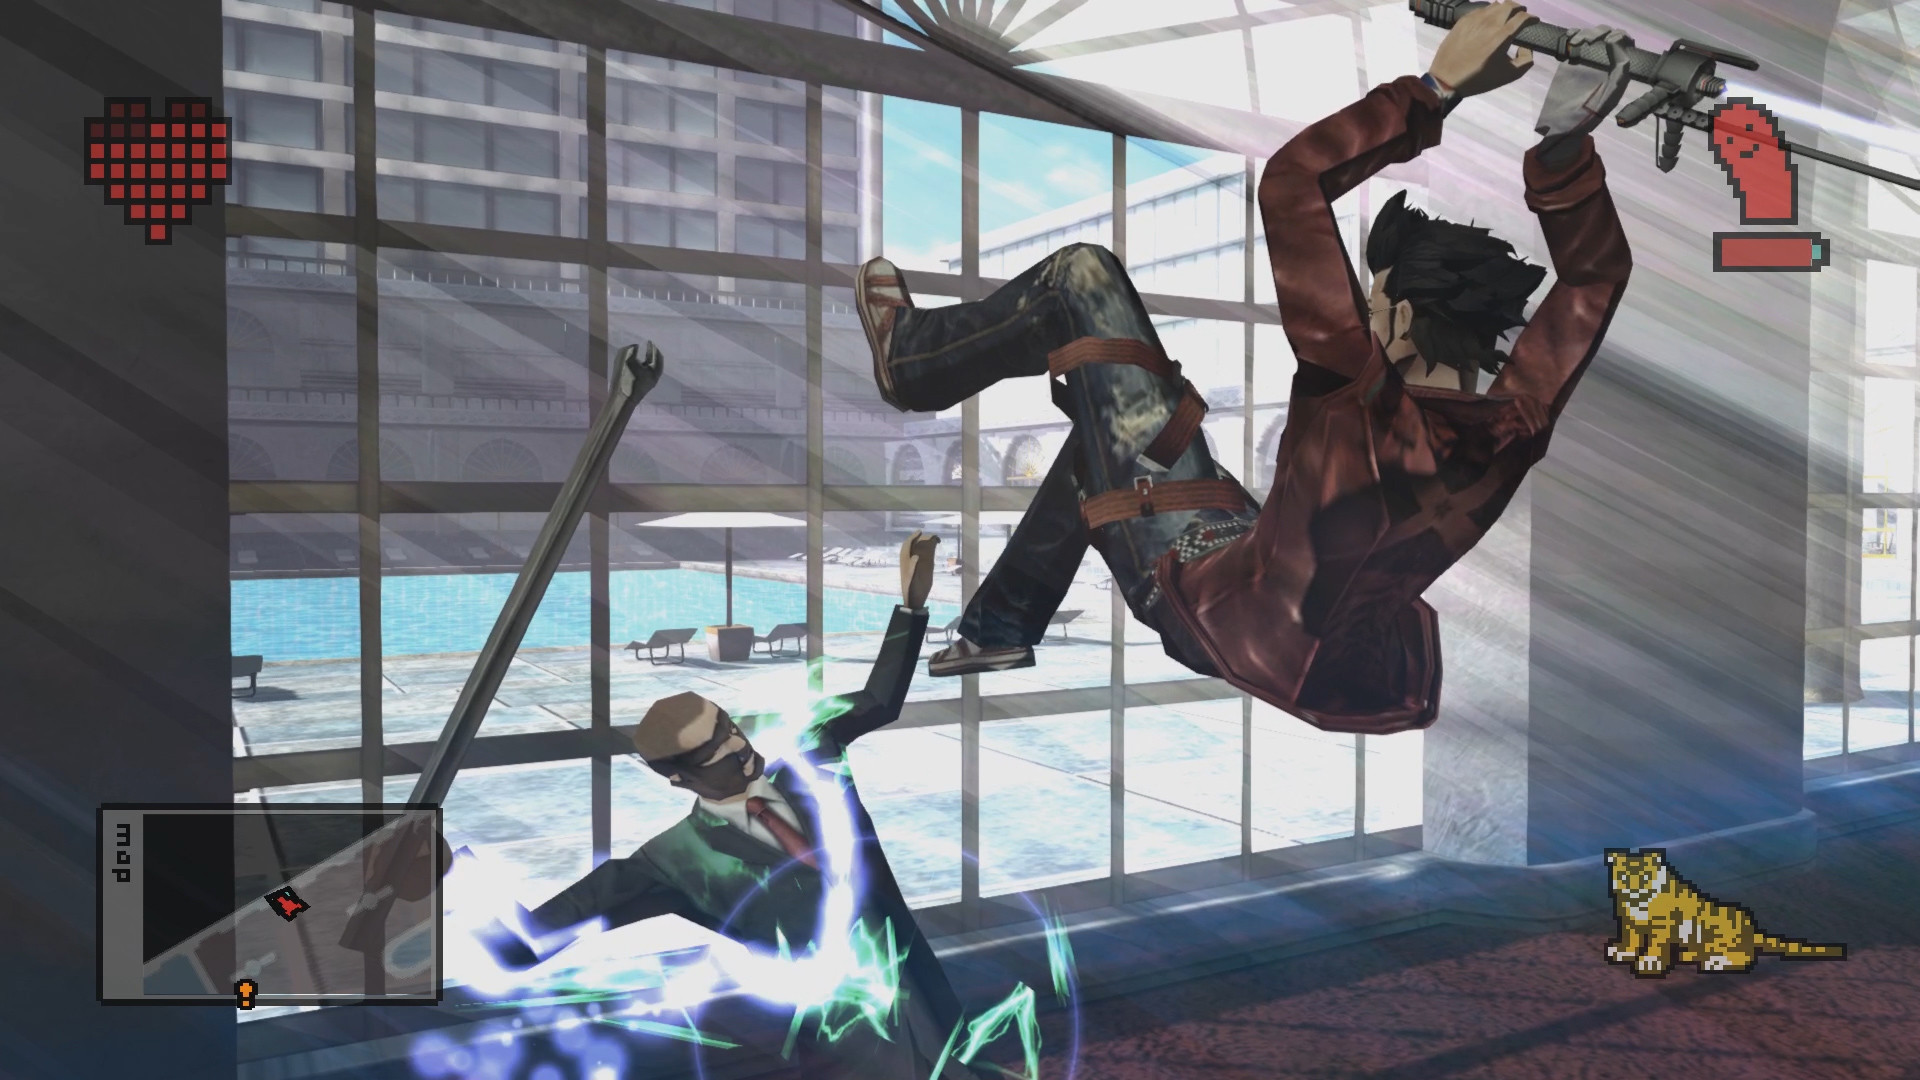 An Image from No More Heroes 2: Desperate Struggle